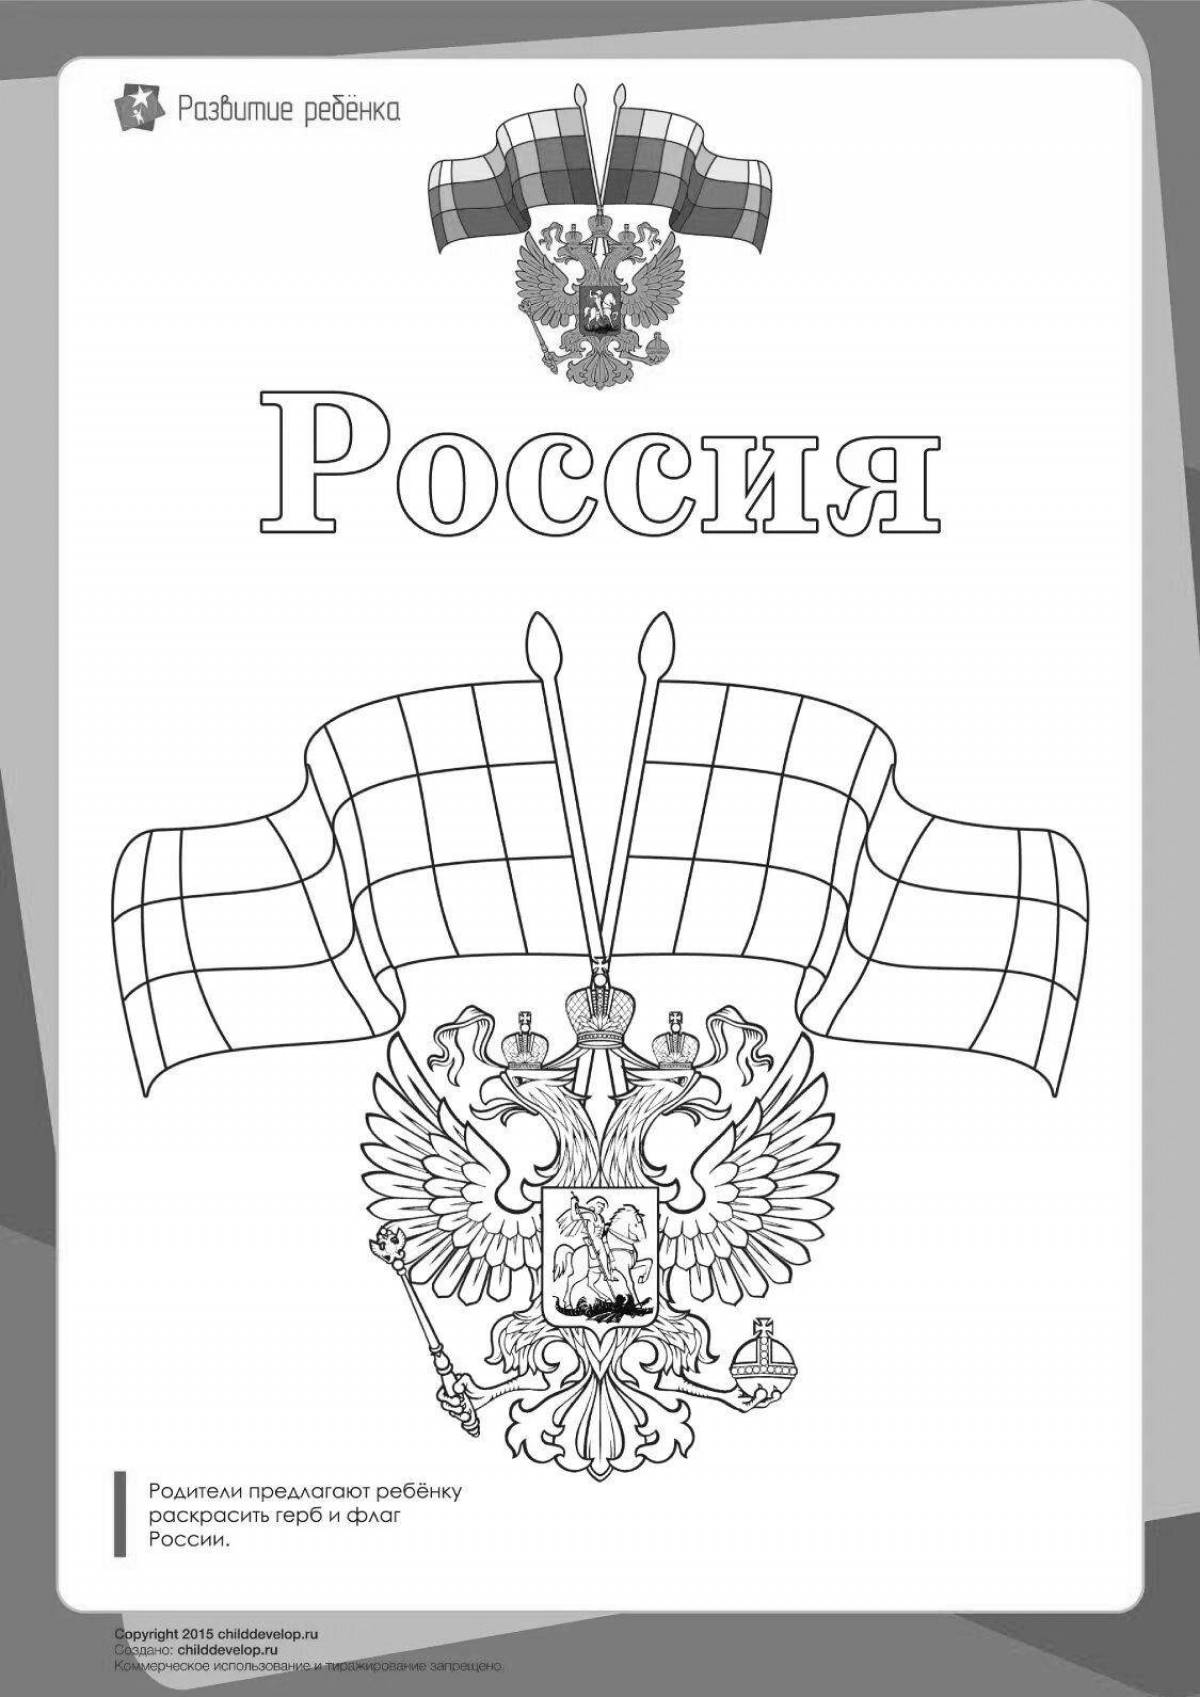 The ornate flag of the Russian Empire